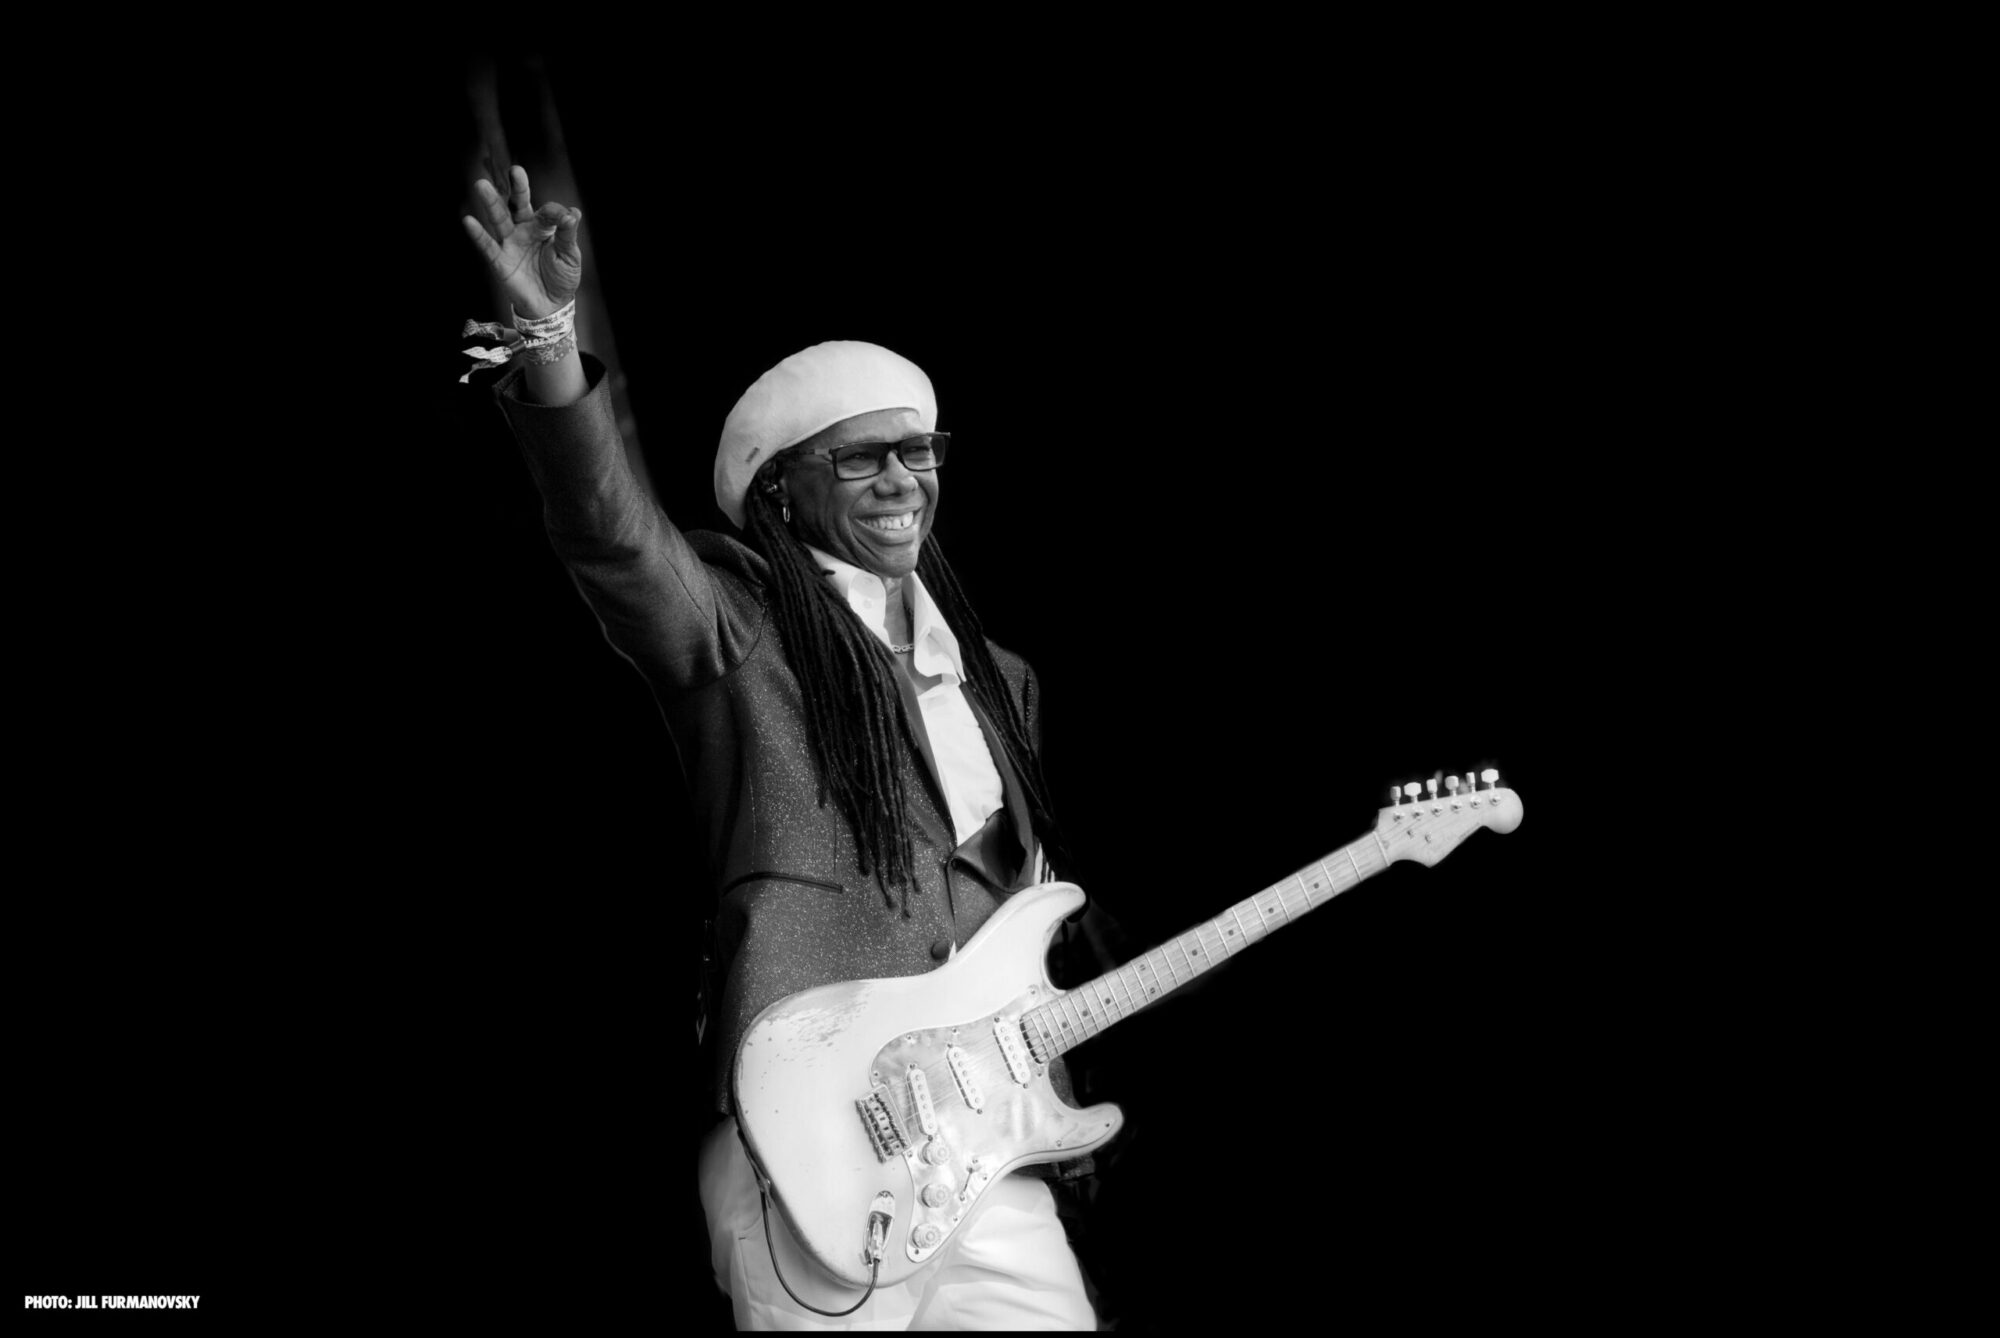 Image name Nile Rodgers and CHIC Official Ticket and Hotel Packages at Dalby Forest Yorkshire scaled the 9 image from the post Nile Rodgers and CHIC - Official Ticket and Hotel Packages at The Piece Hall, Halifax in Yorkshire.com.